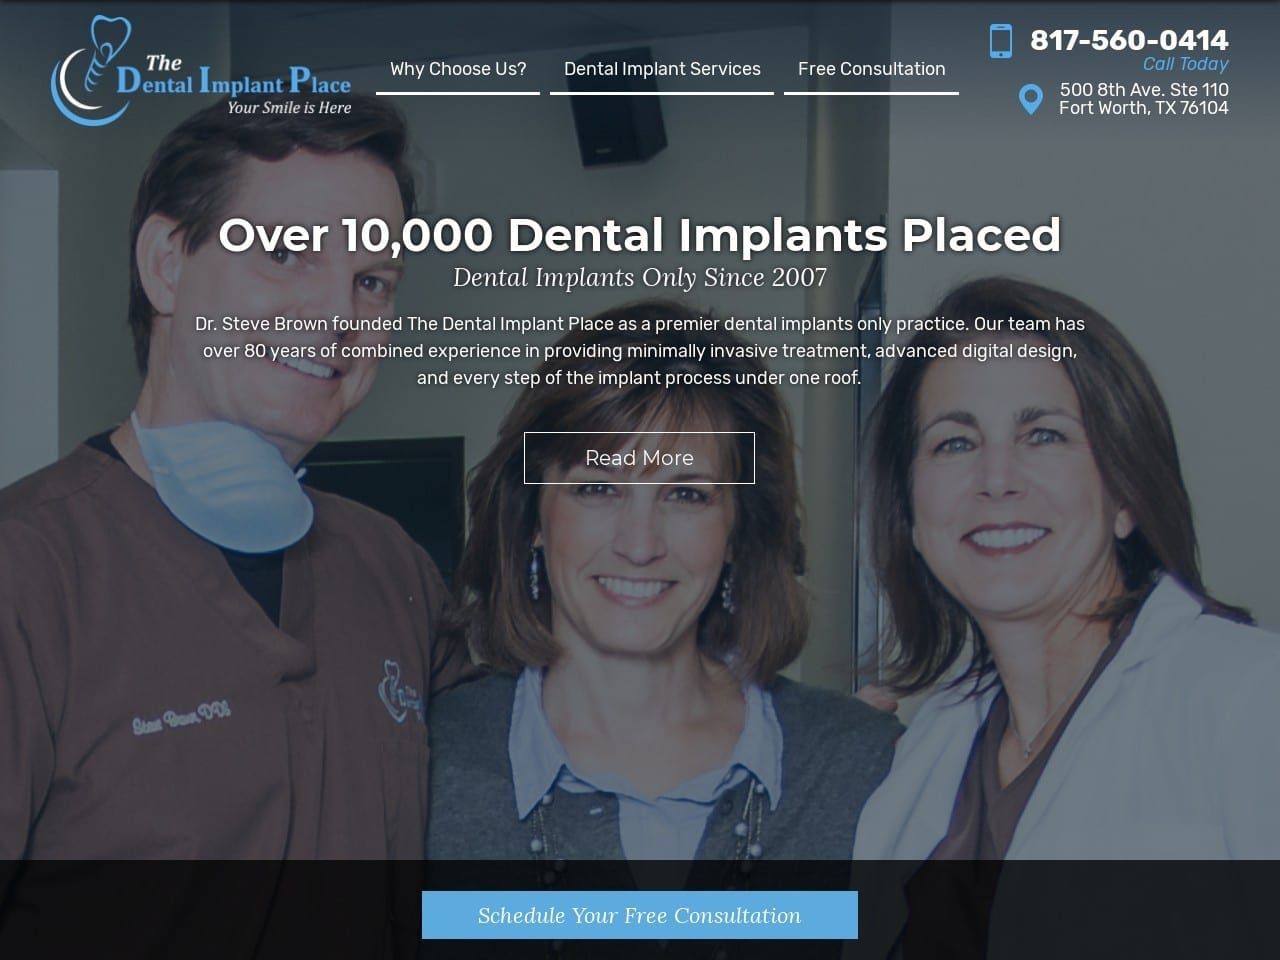 The Dental Implant Place Website Screenshot from thedentalimplantplace.com